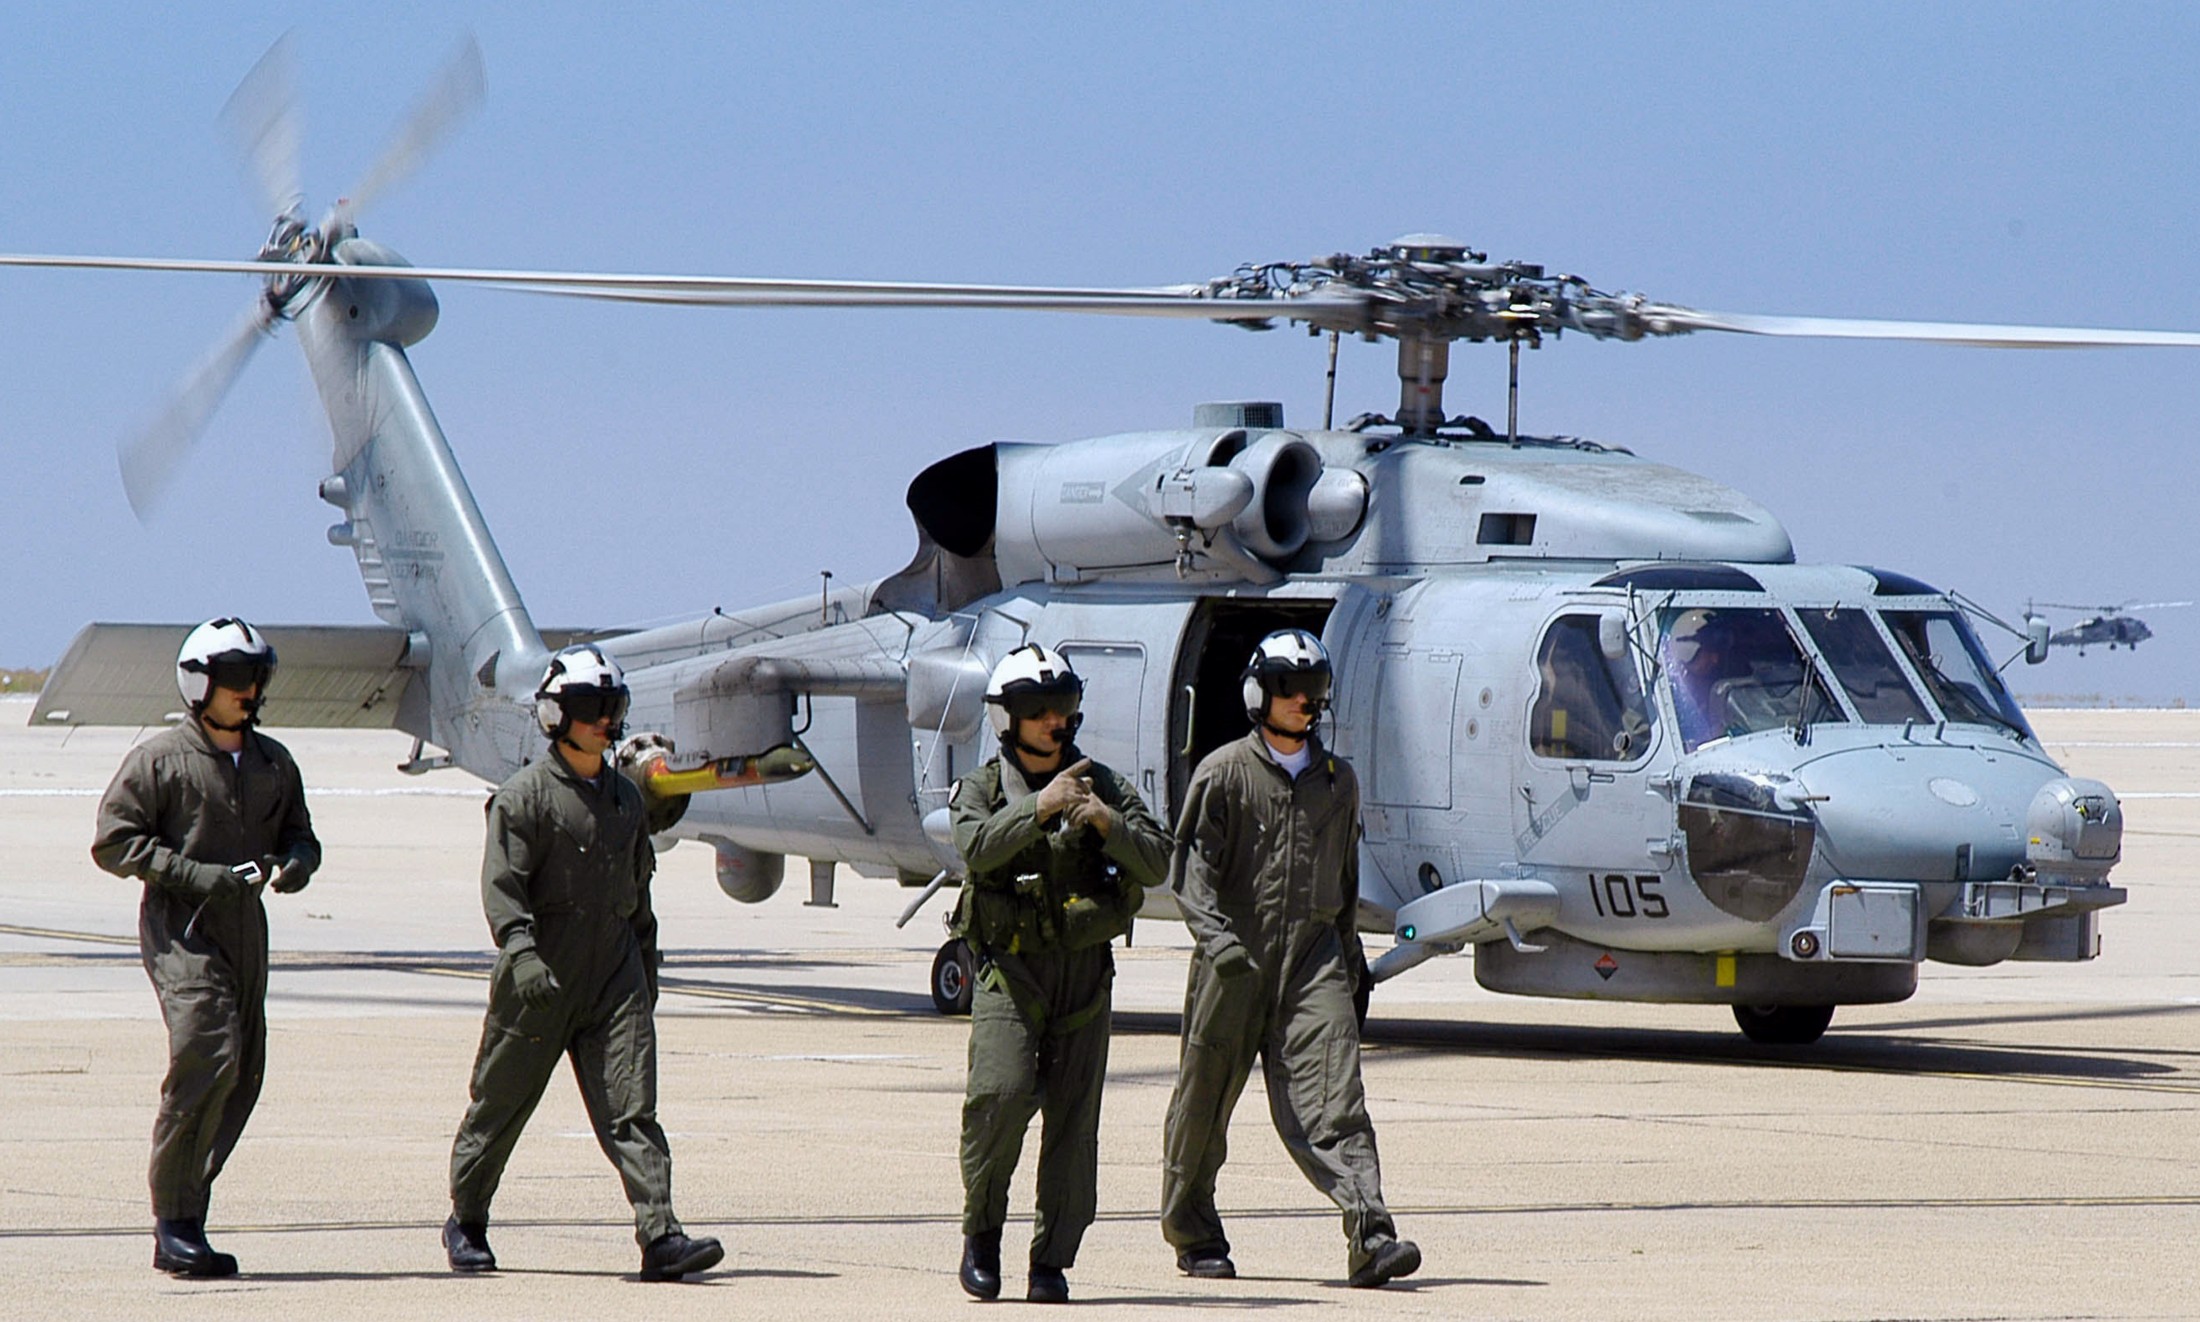 hsm-41 seahawks helicopter maritime strike squadron mh-60r fleet replacement navy 2007 08